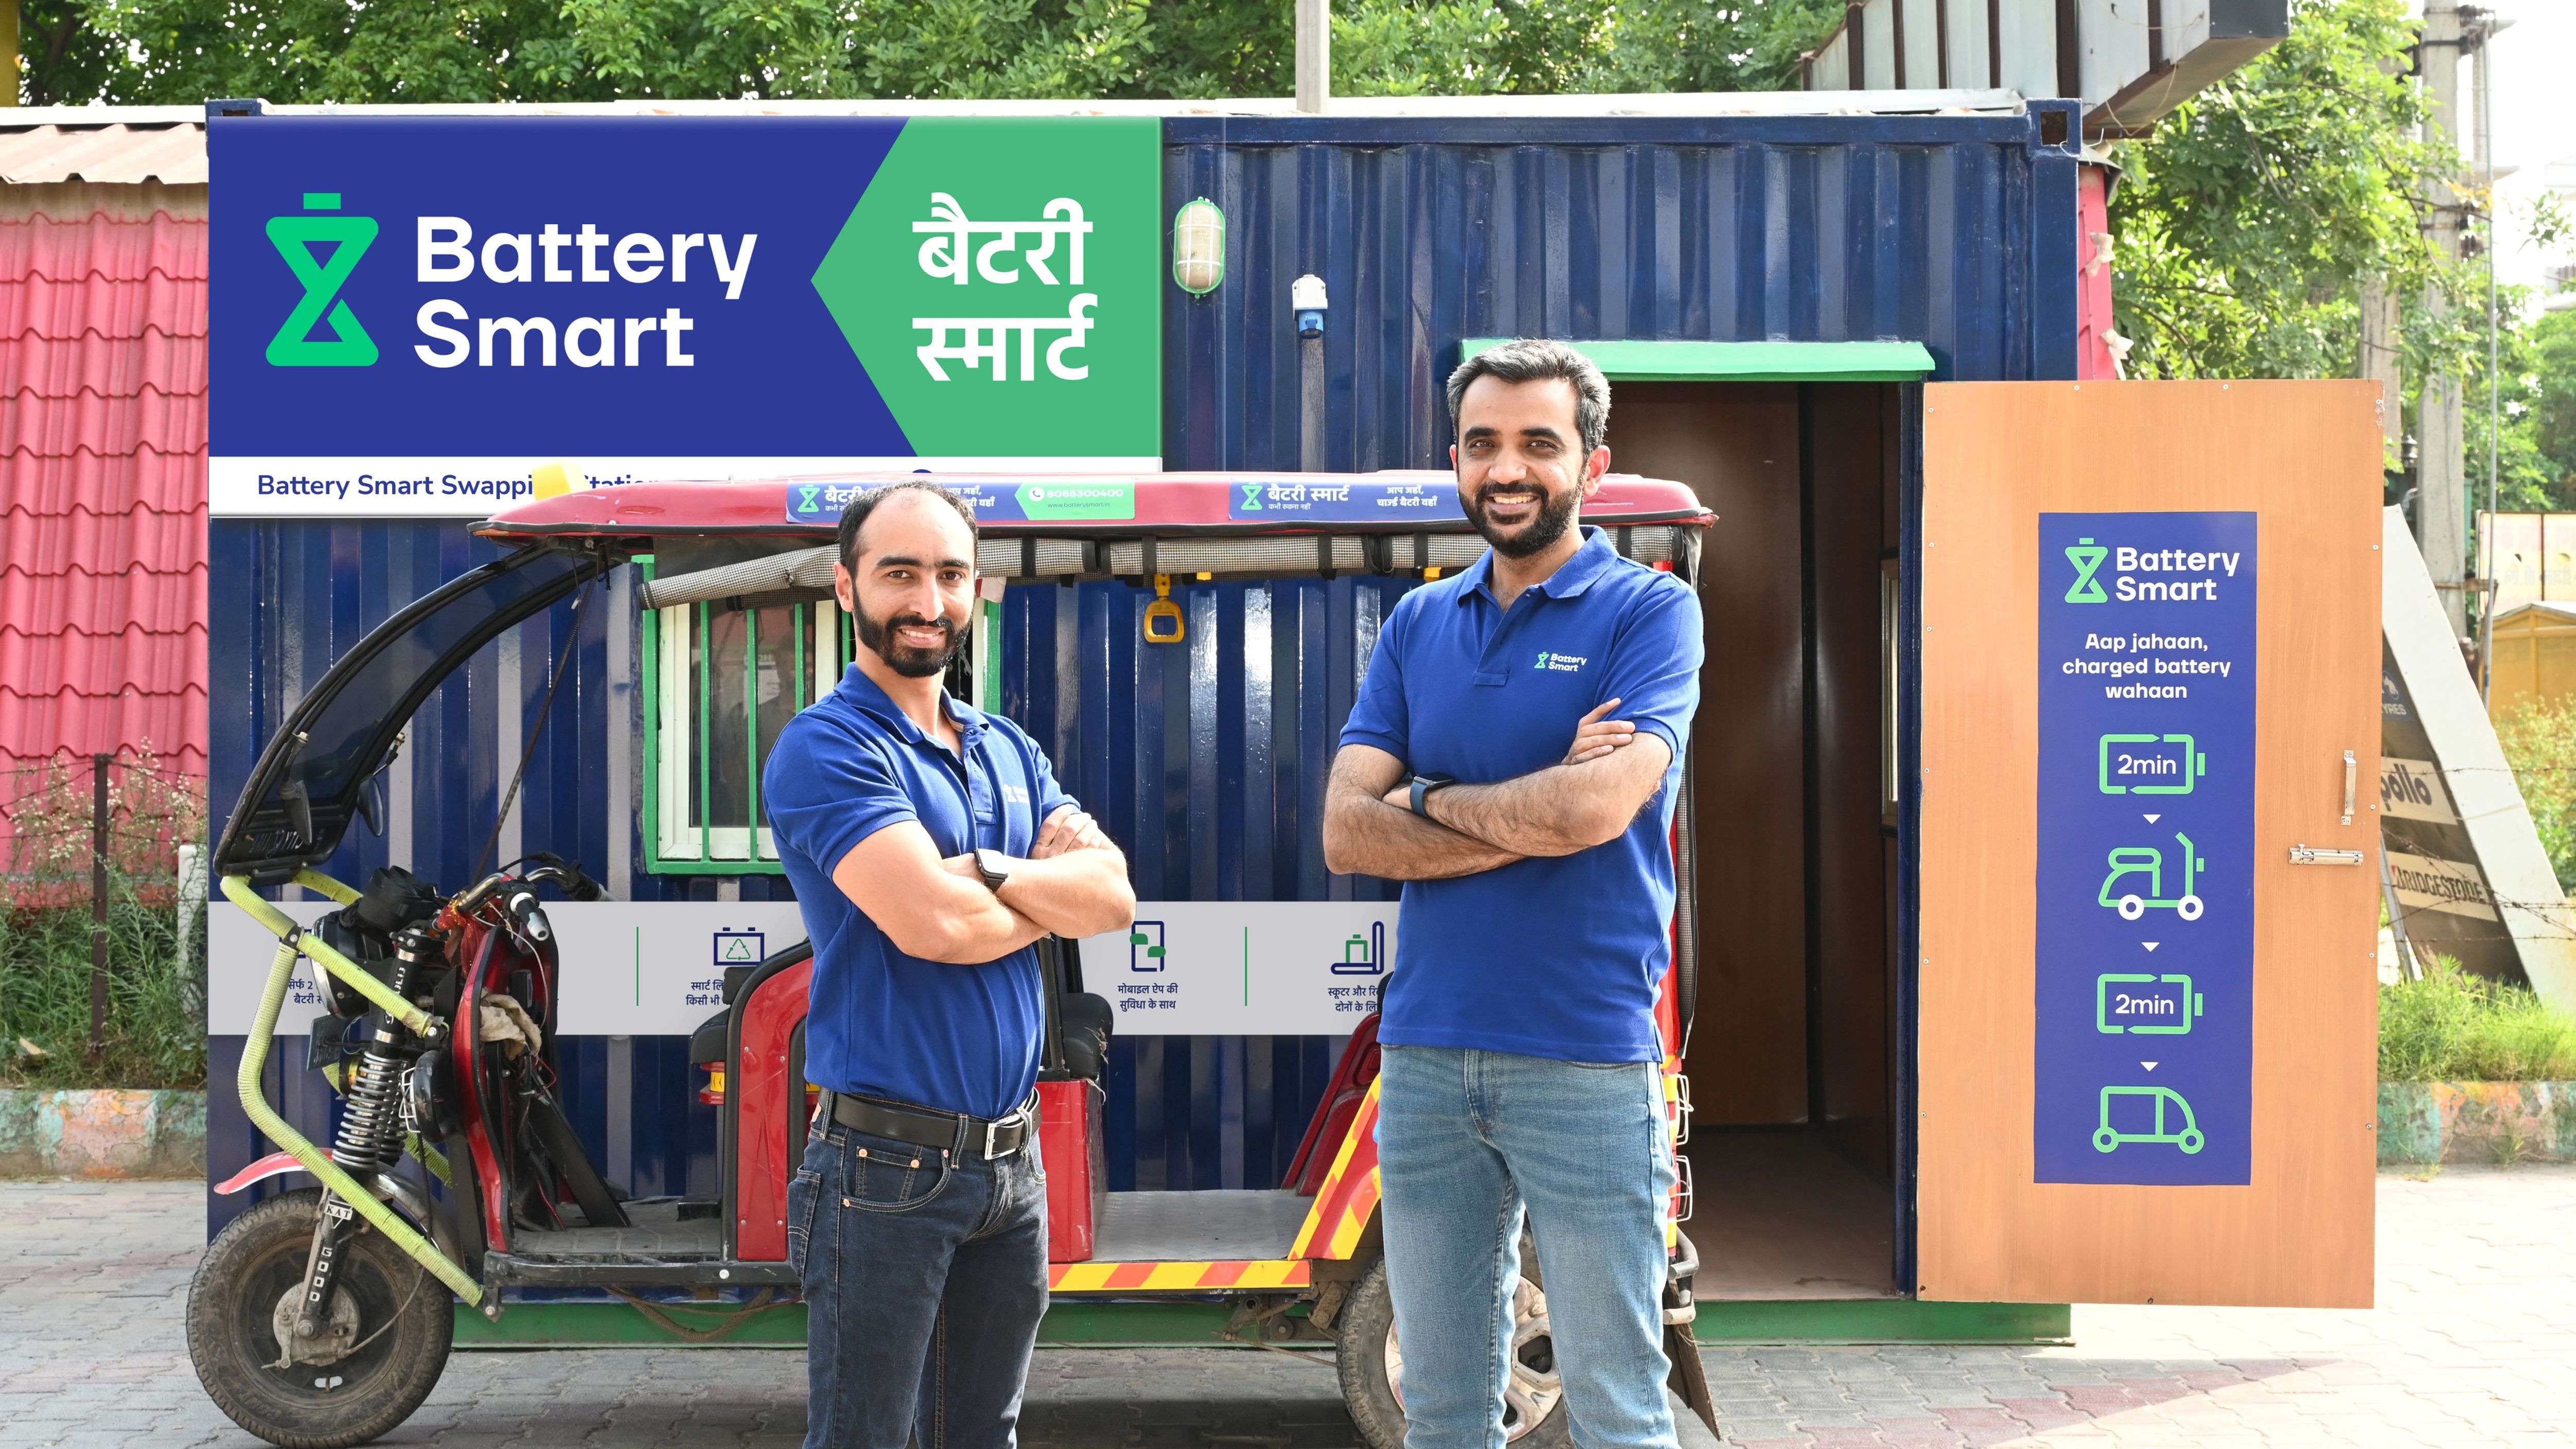 Battery Smart raises $65M in Series B funding round led by LeapFrog Investments